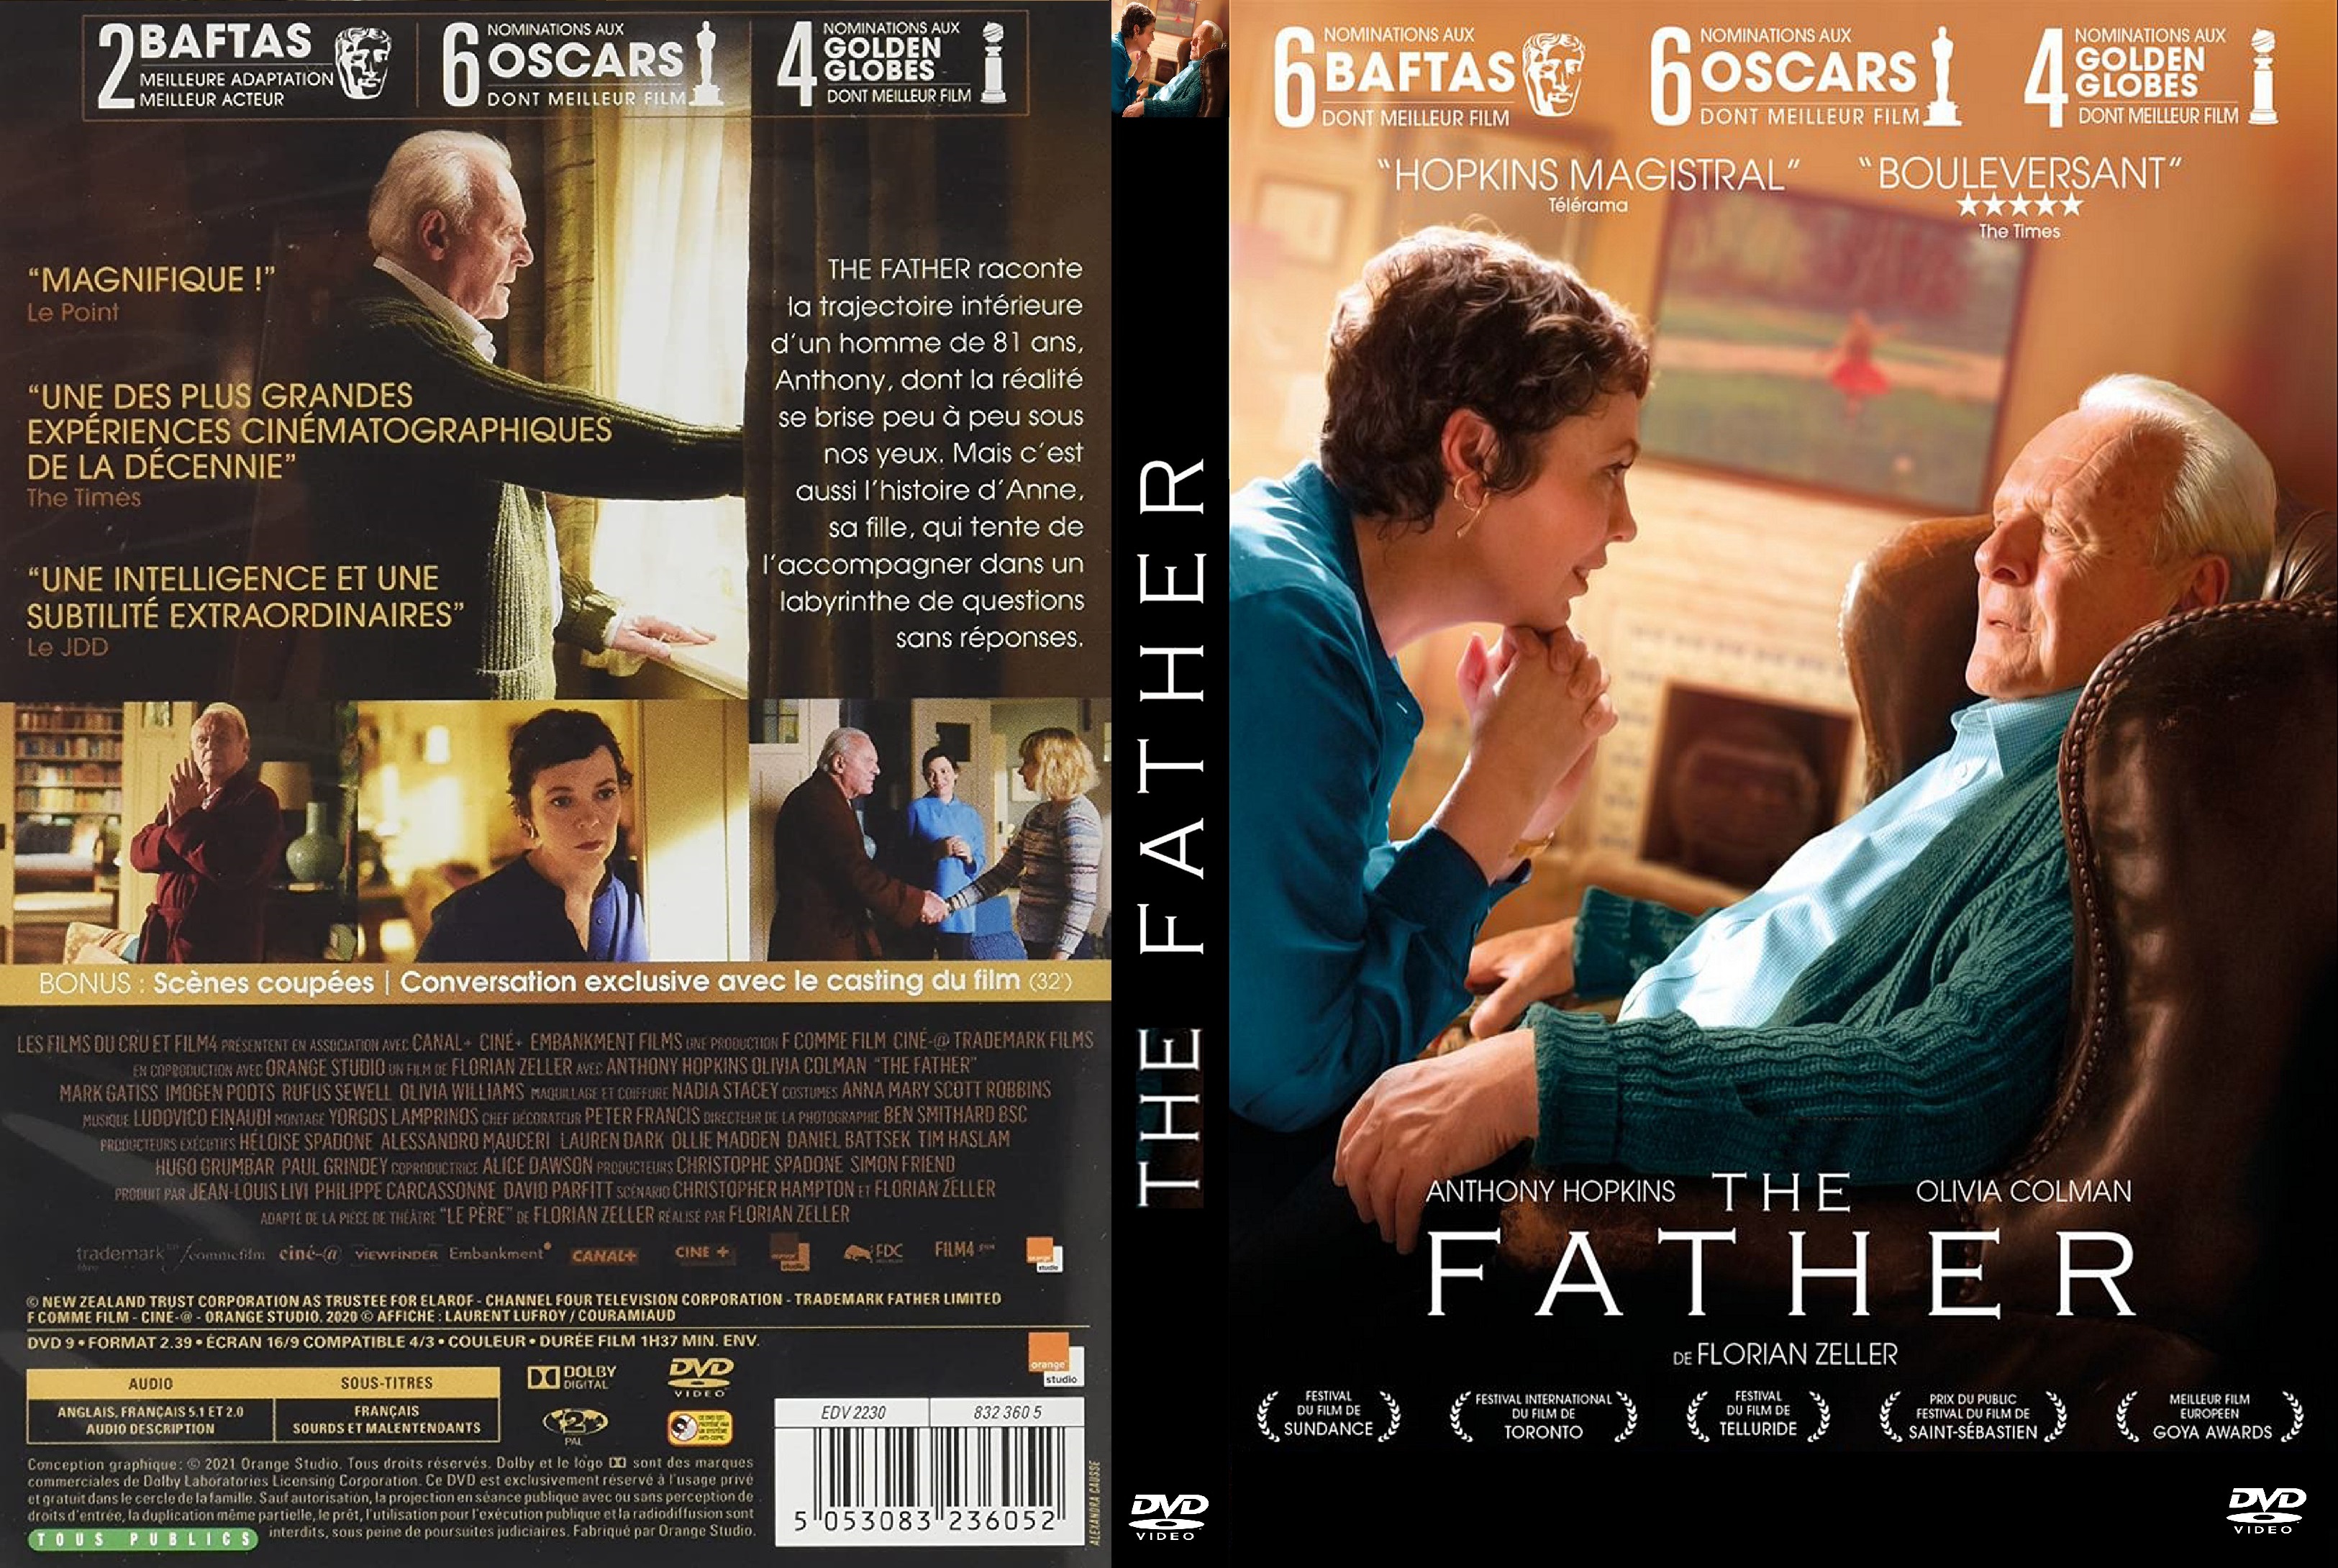 Jaquette DVD The Father custom